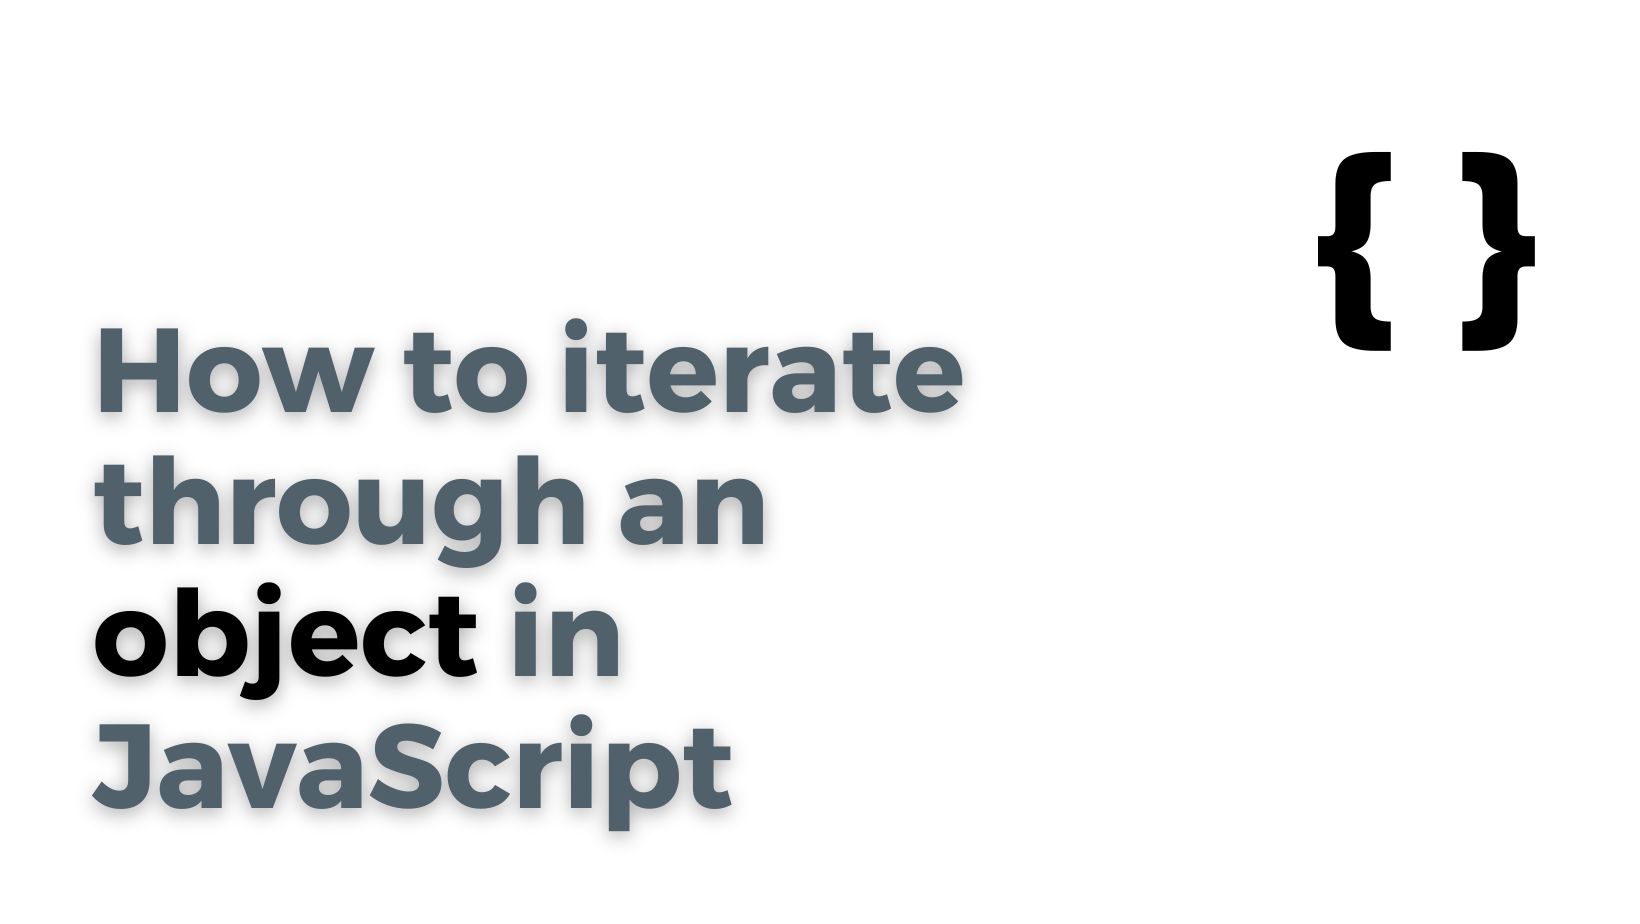 Iterate through an object in JavaScript